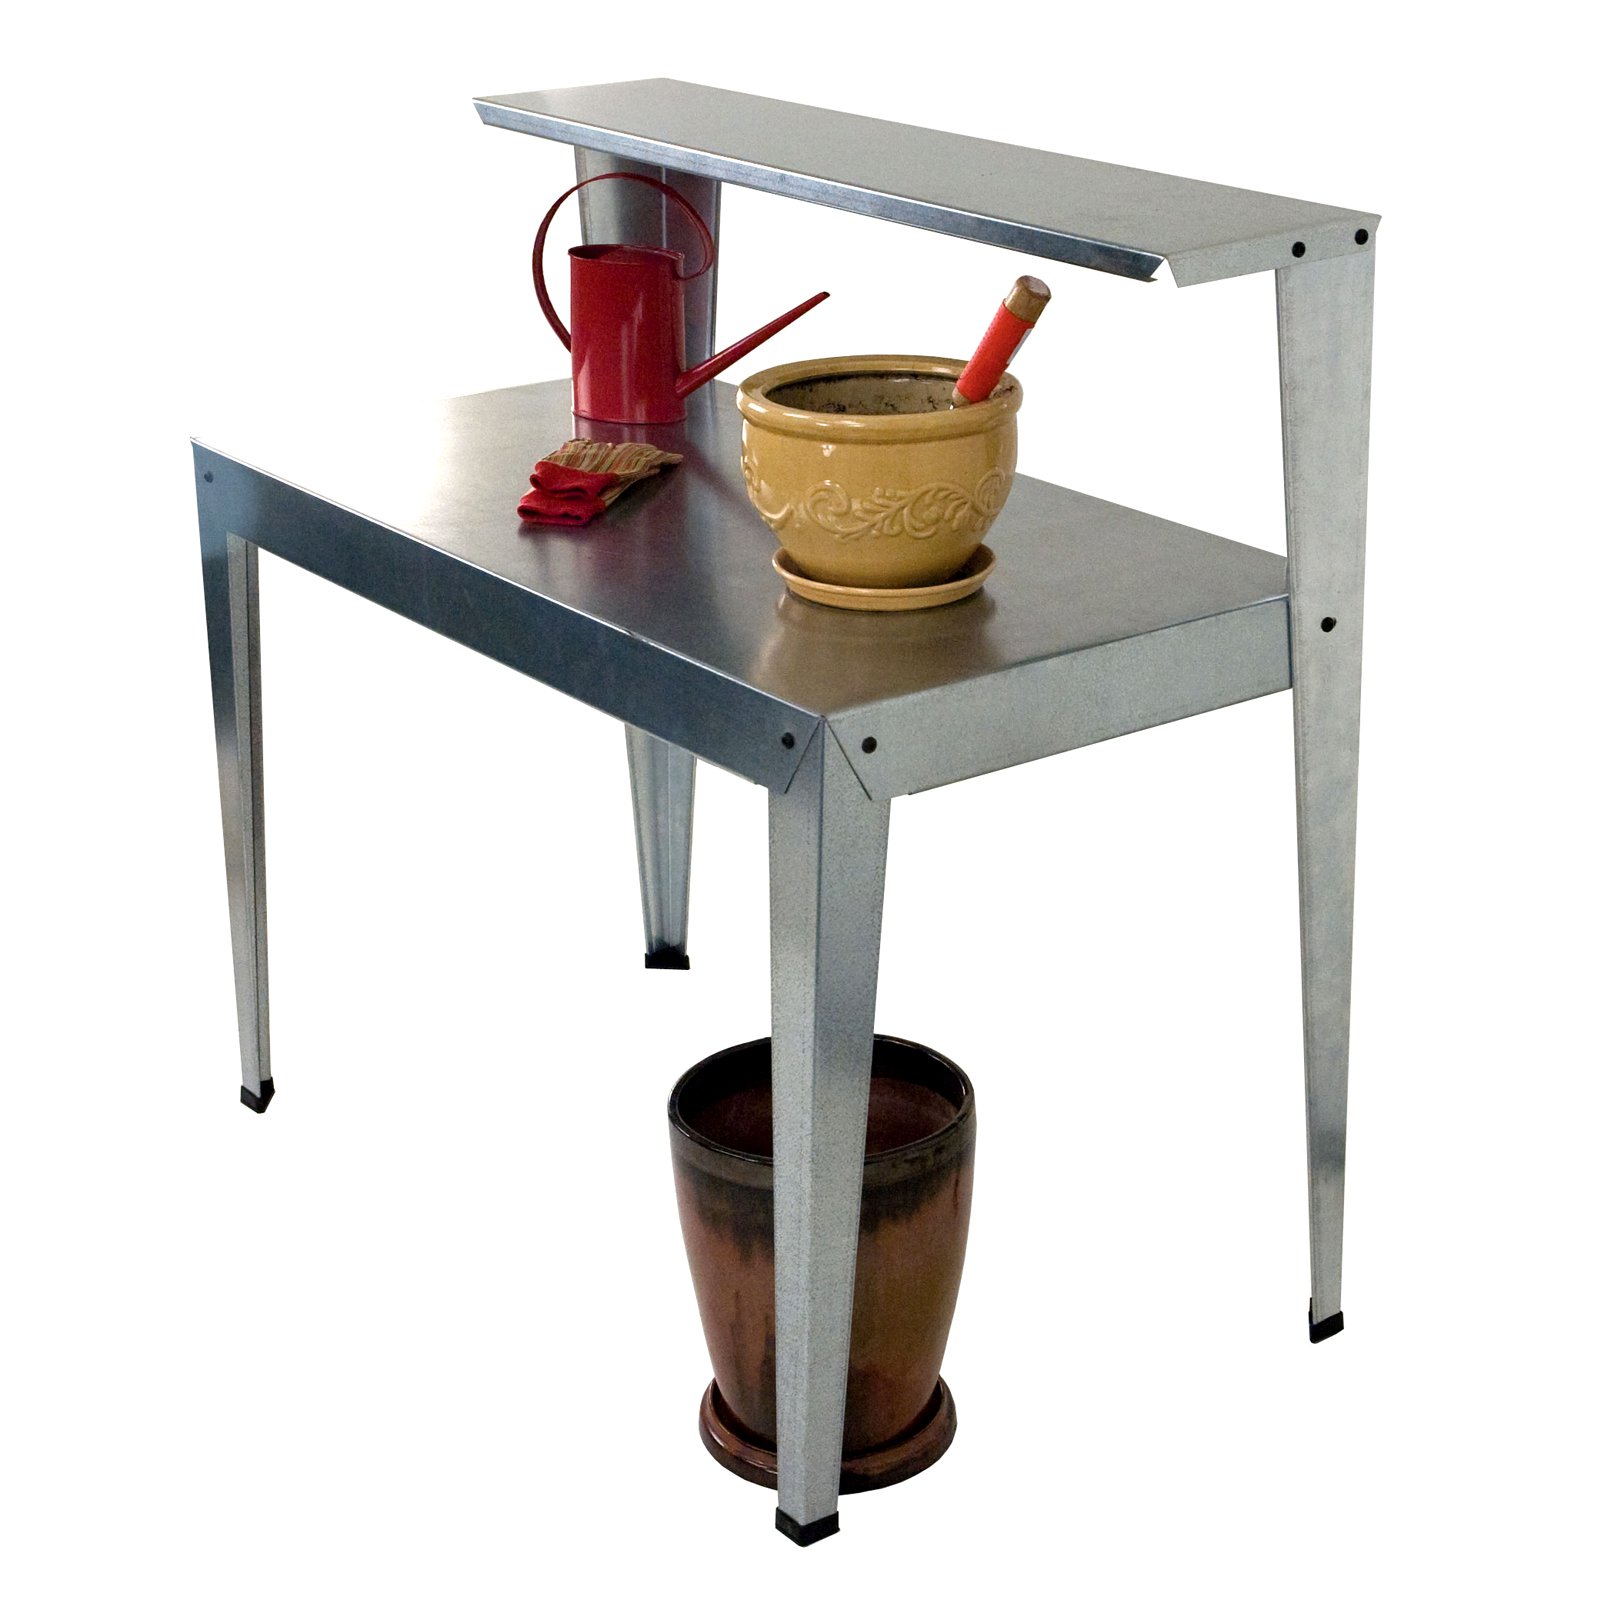 Poly-Tex 2-Tier Galvanized Steel Potting Bench - image 2 of 2